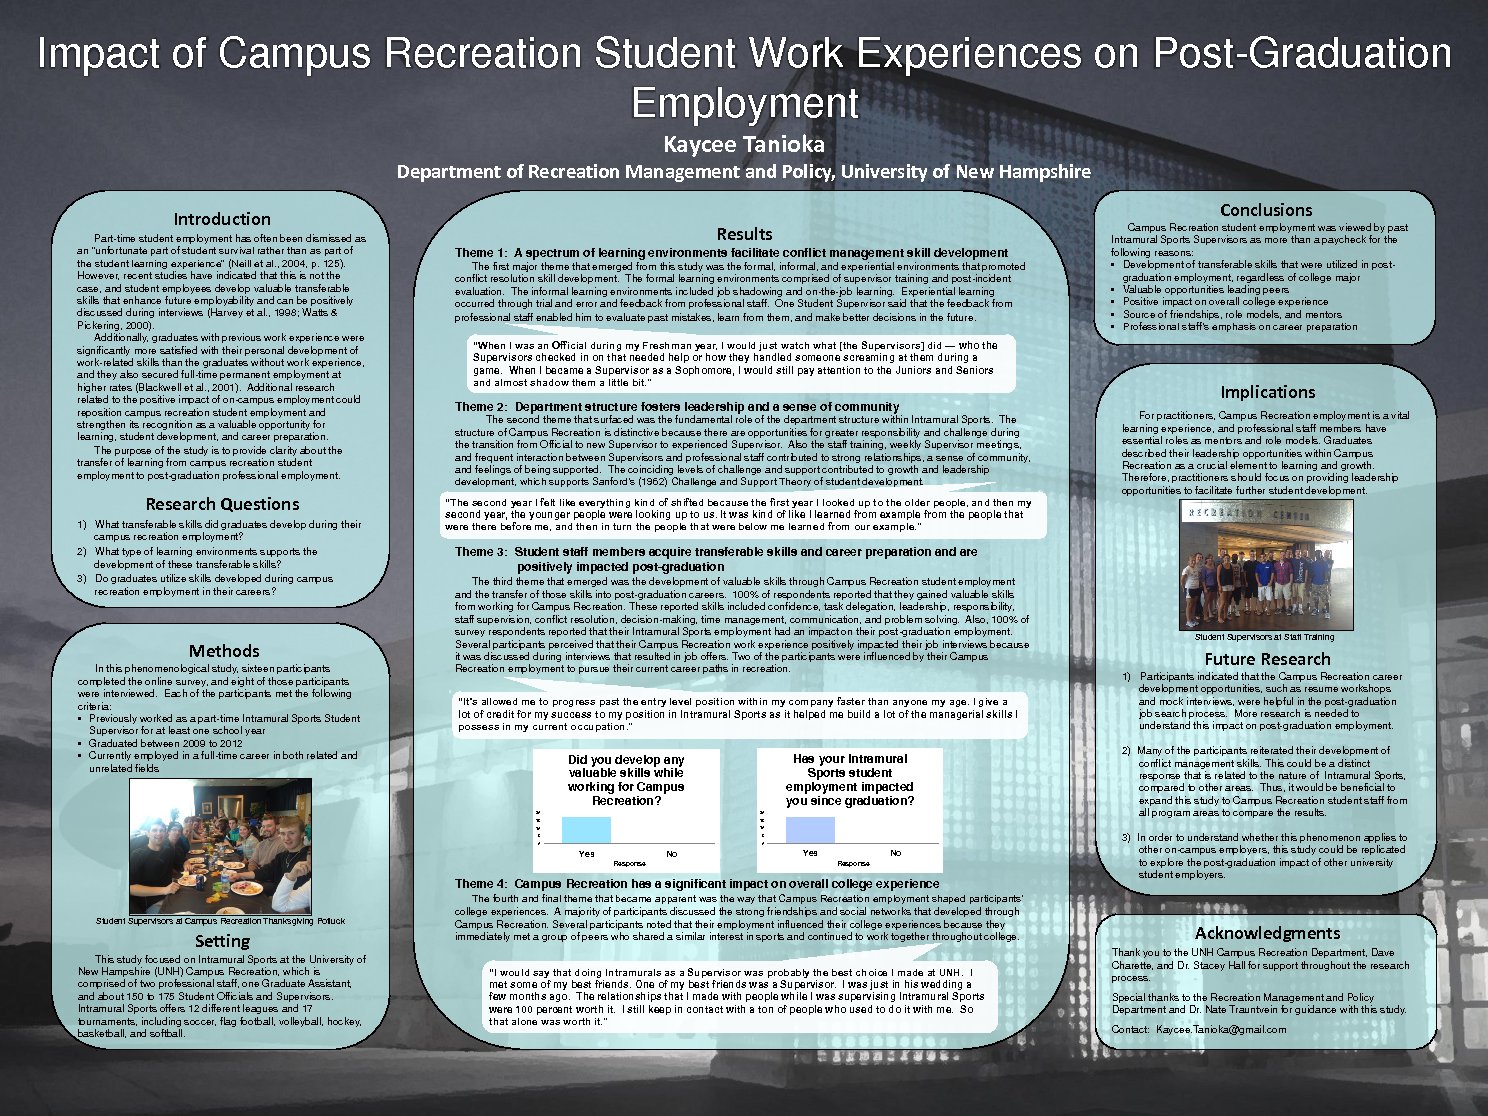 Impact Of Campus Recreation Student Work Experiences On Post-Graduation Employment by kka24